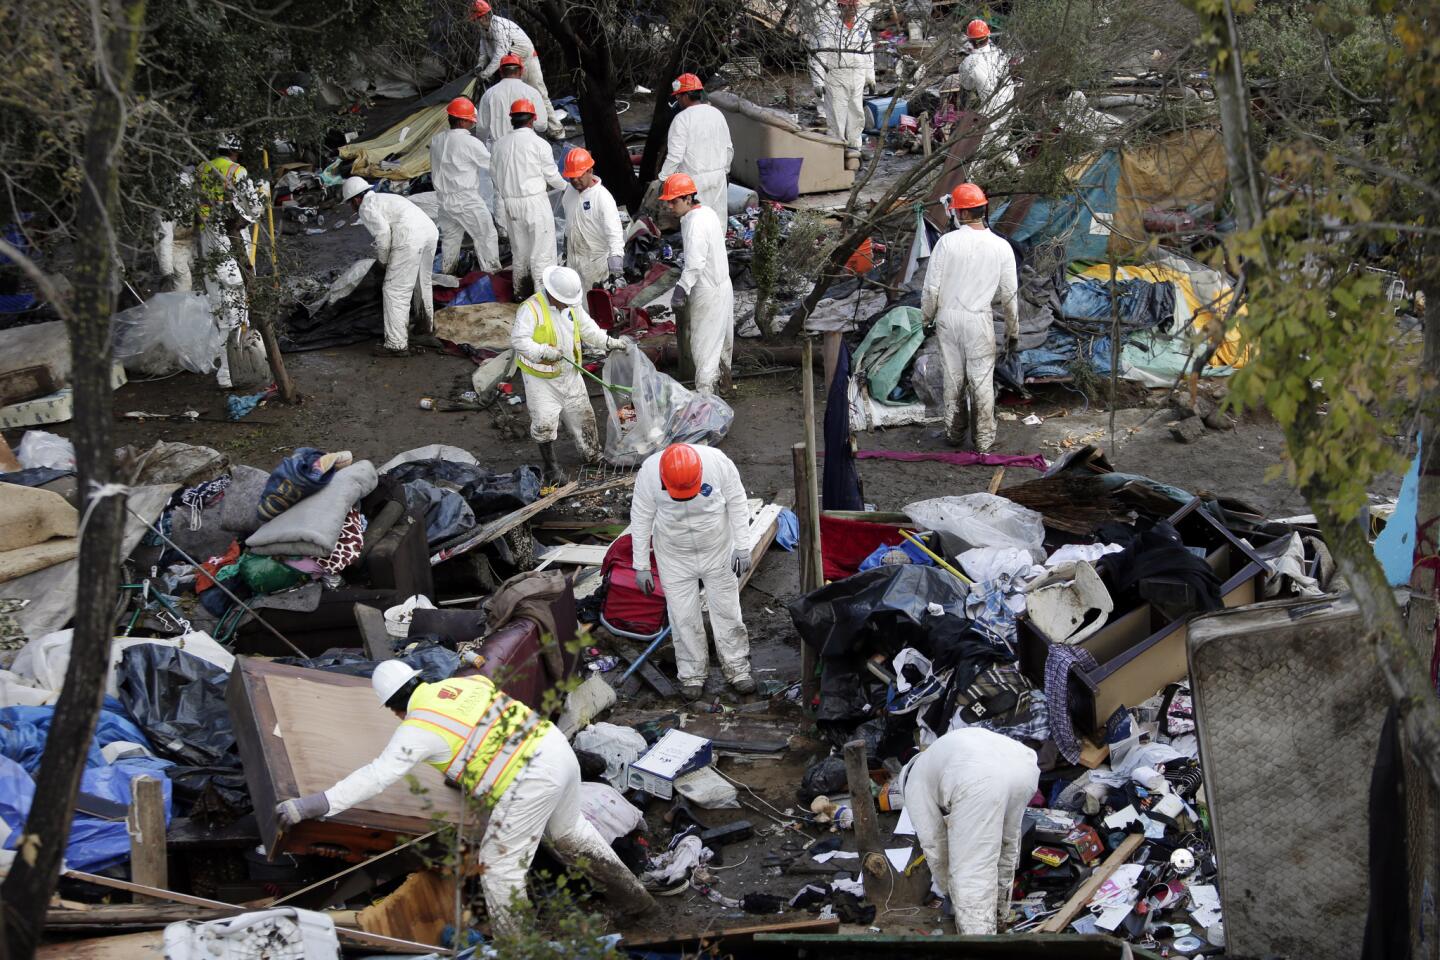 Crews begin the clean up process at a homeless encampment known as The Jungle in San Jose.